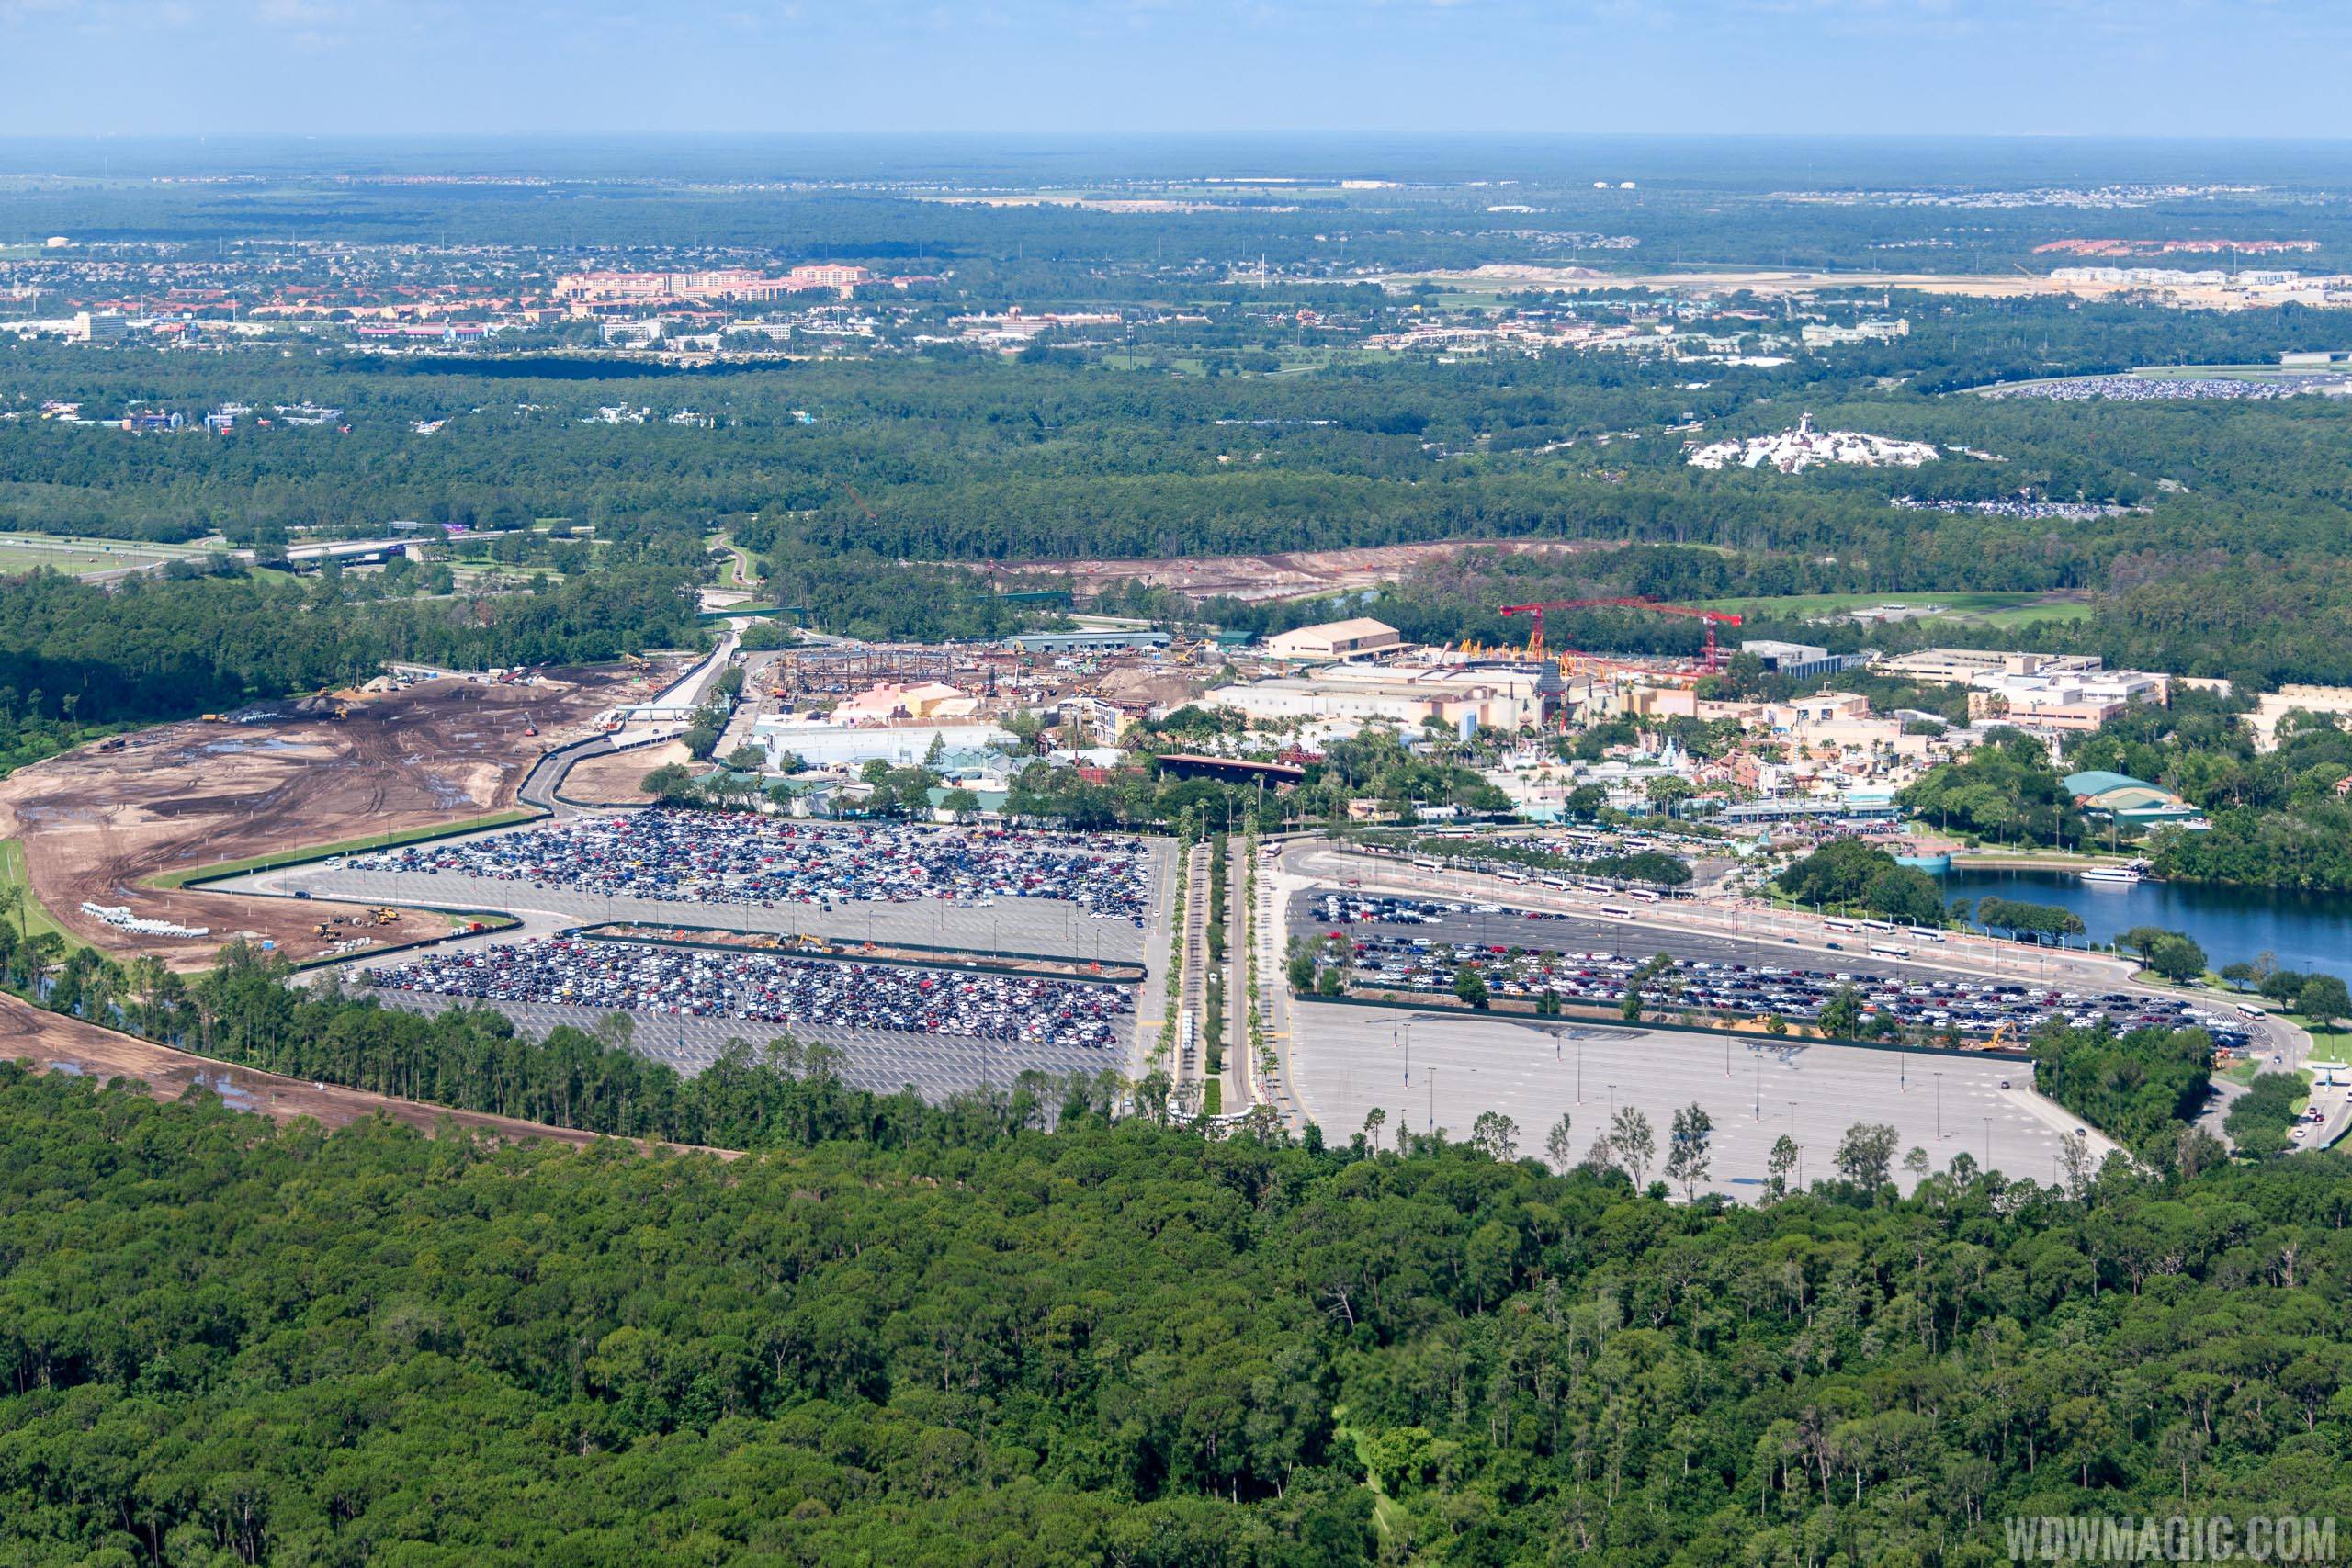 Overview of the parking lot space expansion at Disney's Hollywood Studios